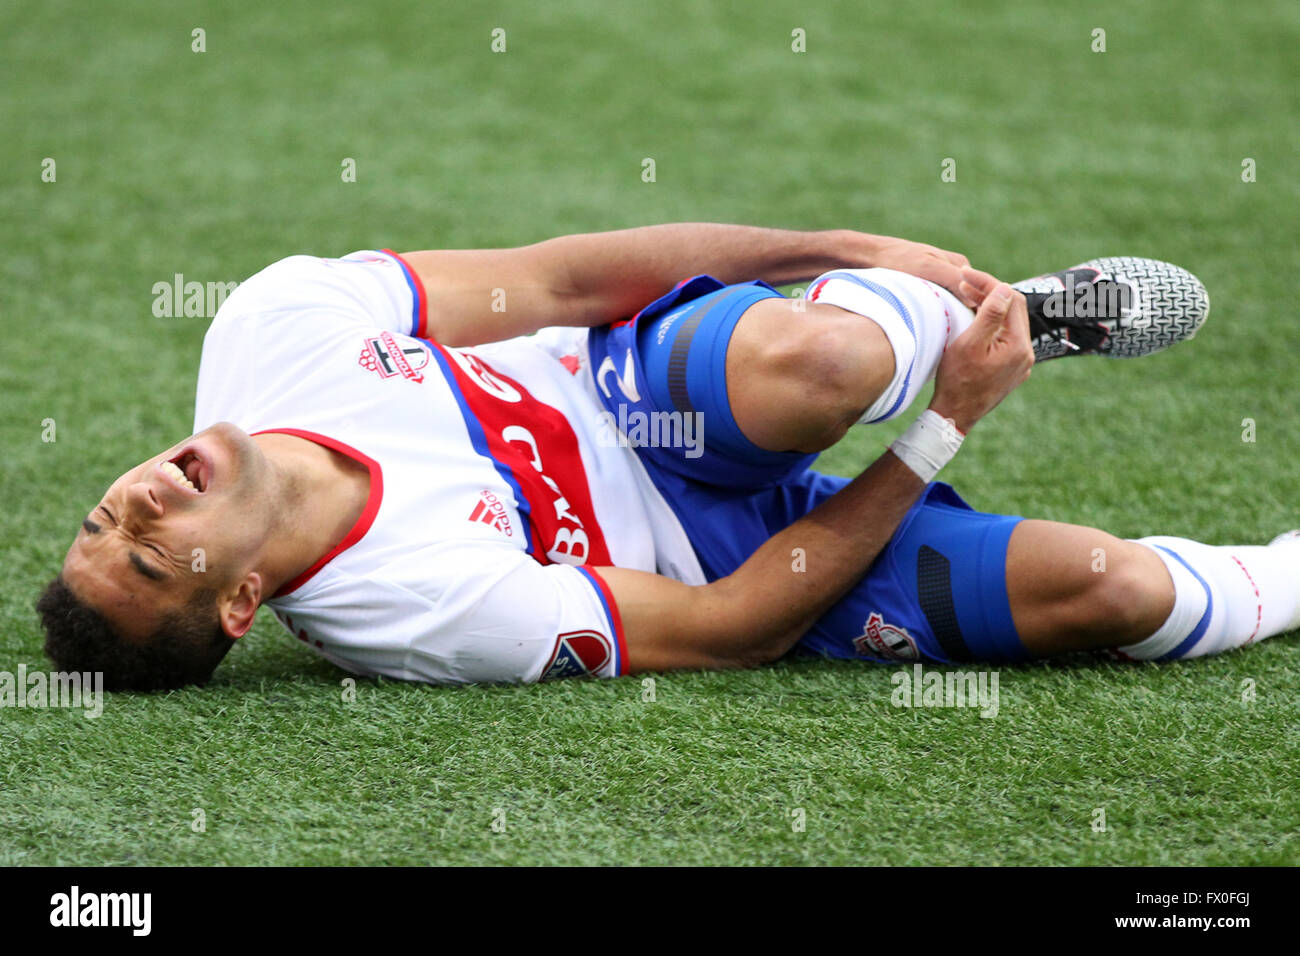 April 9, 2016; Foxborough, MA, USA; Toronto FC defender Justin Morrow (2) grimaces while grabbing his ankle during the second half of an MLS game between the New England Revolution and Toronto FC at Gillette Stadium. The gamed ended in a 1-1 draw. © Cal Sport Media/Alamy Live News Stock Photo